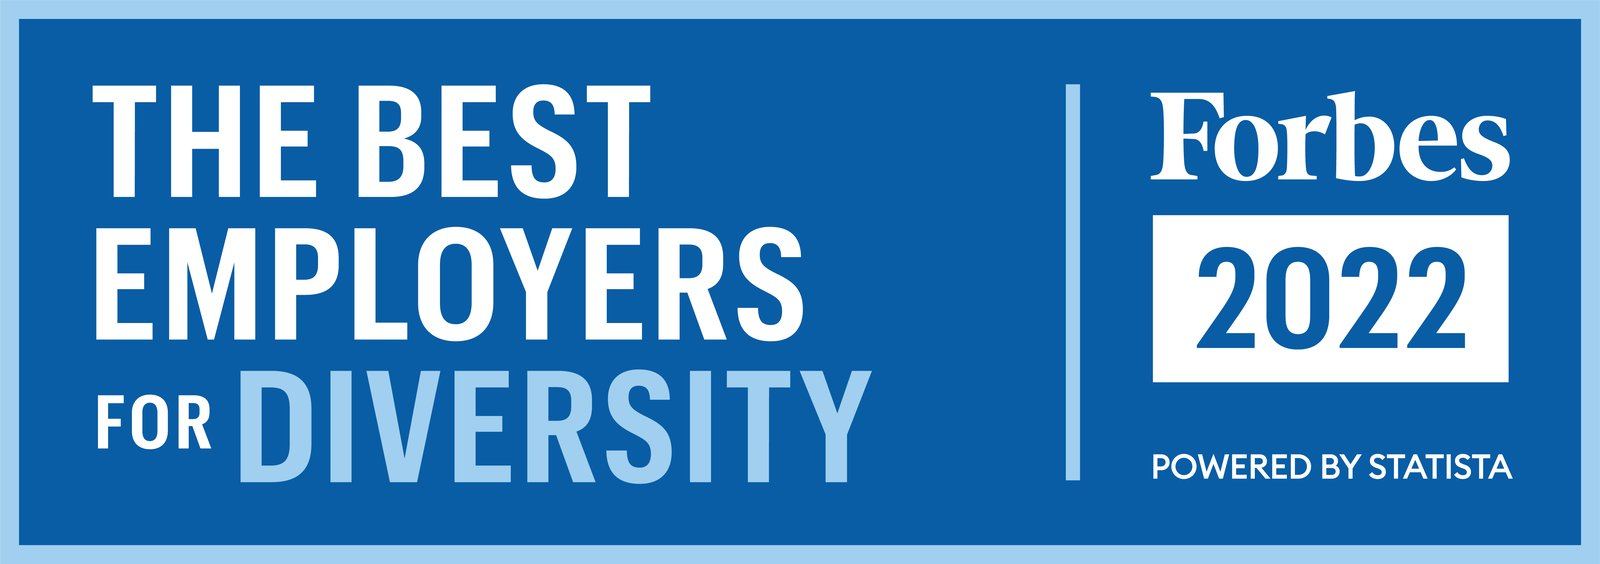 Forbes 2022 Best Employer for Diversity